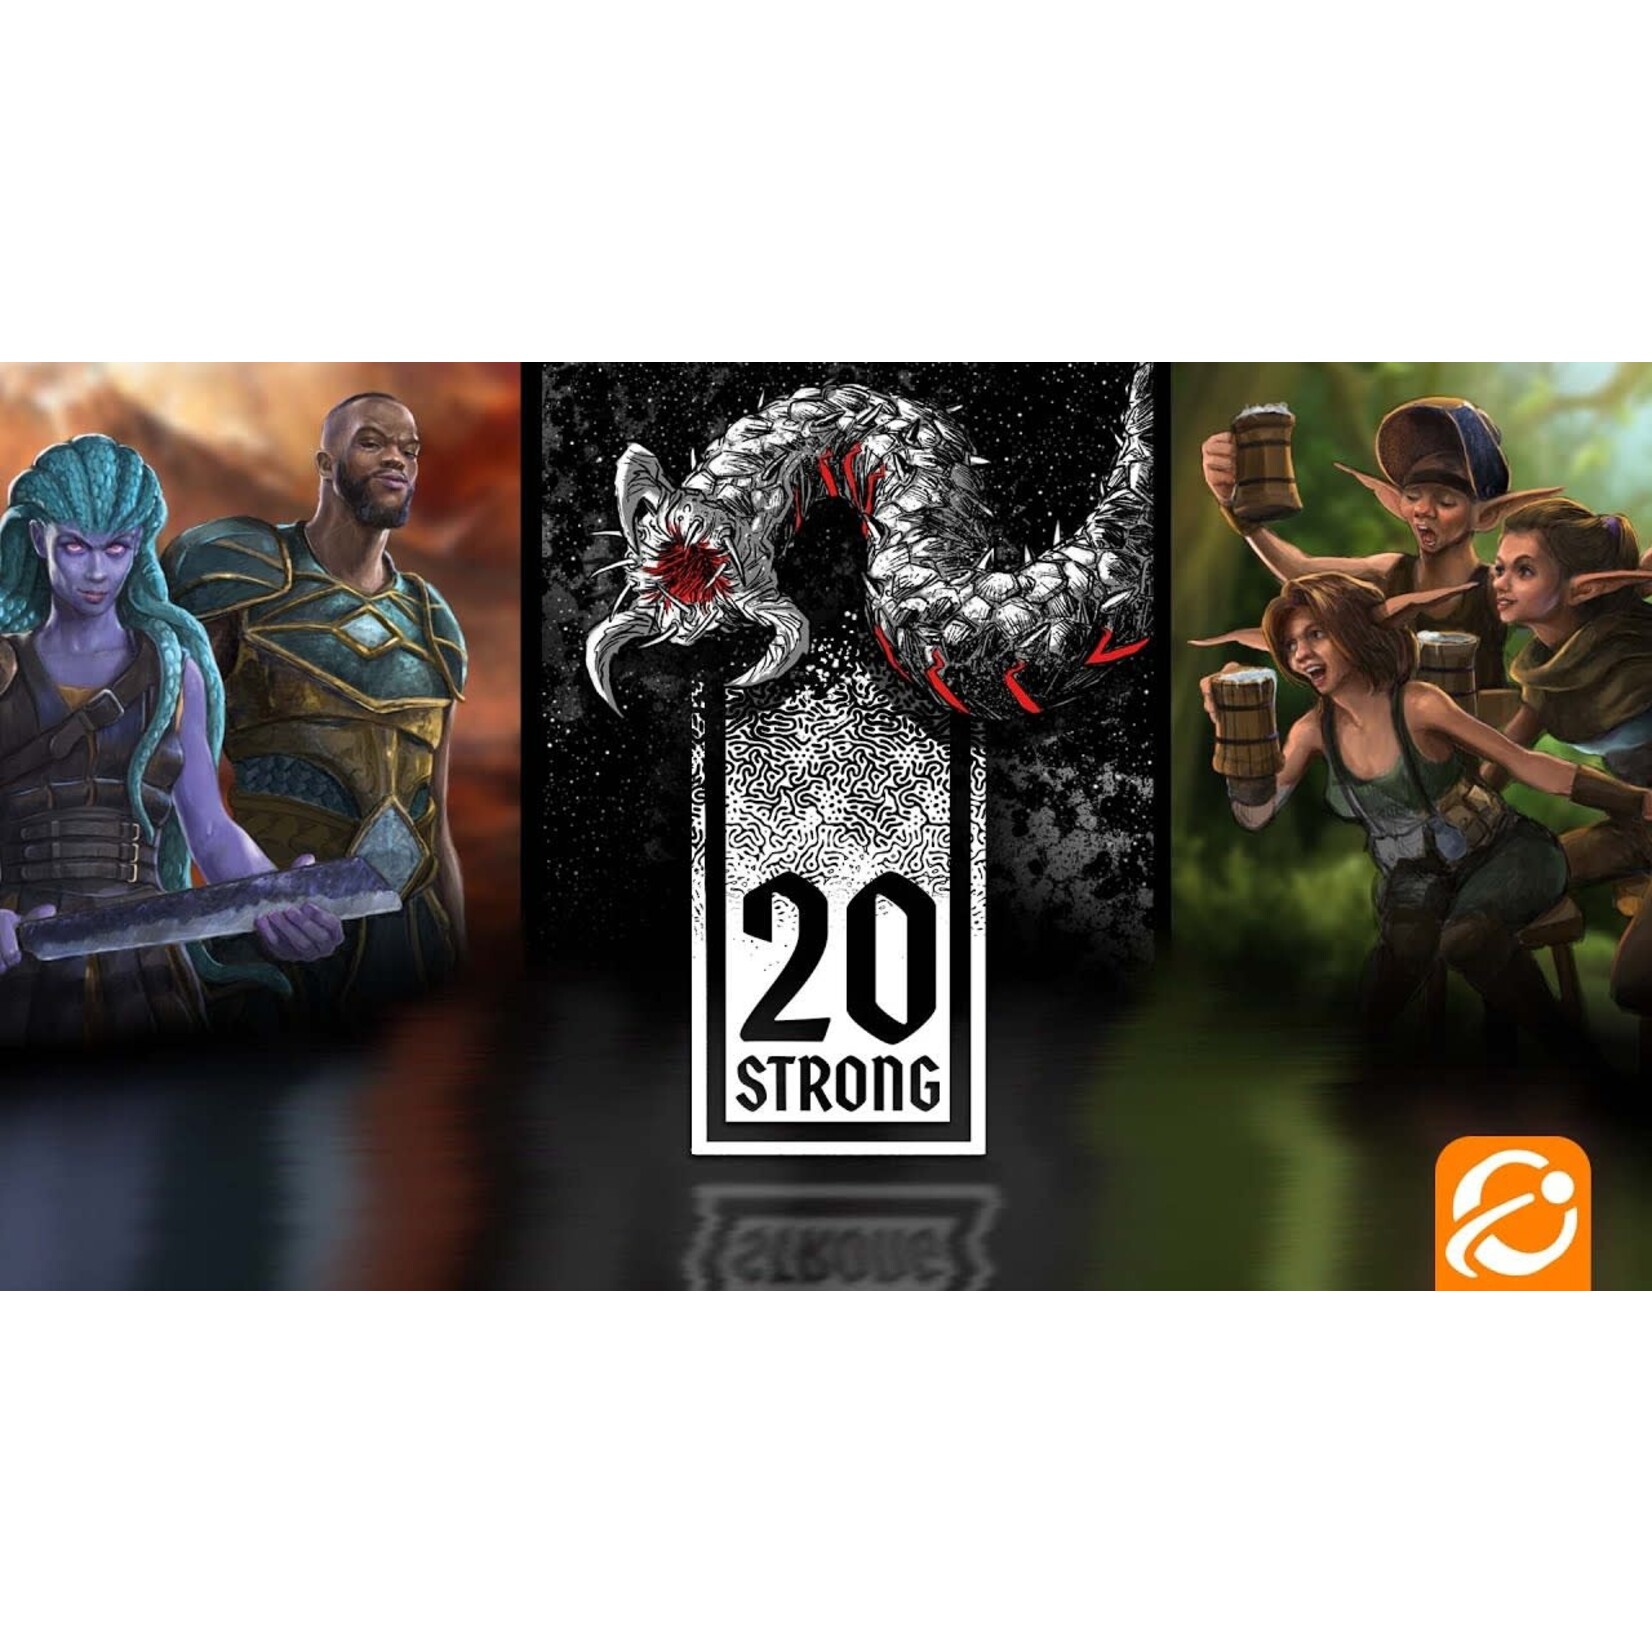 20 Strong Core Game + Expansions + Promo Cards Bundle